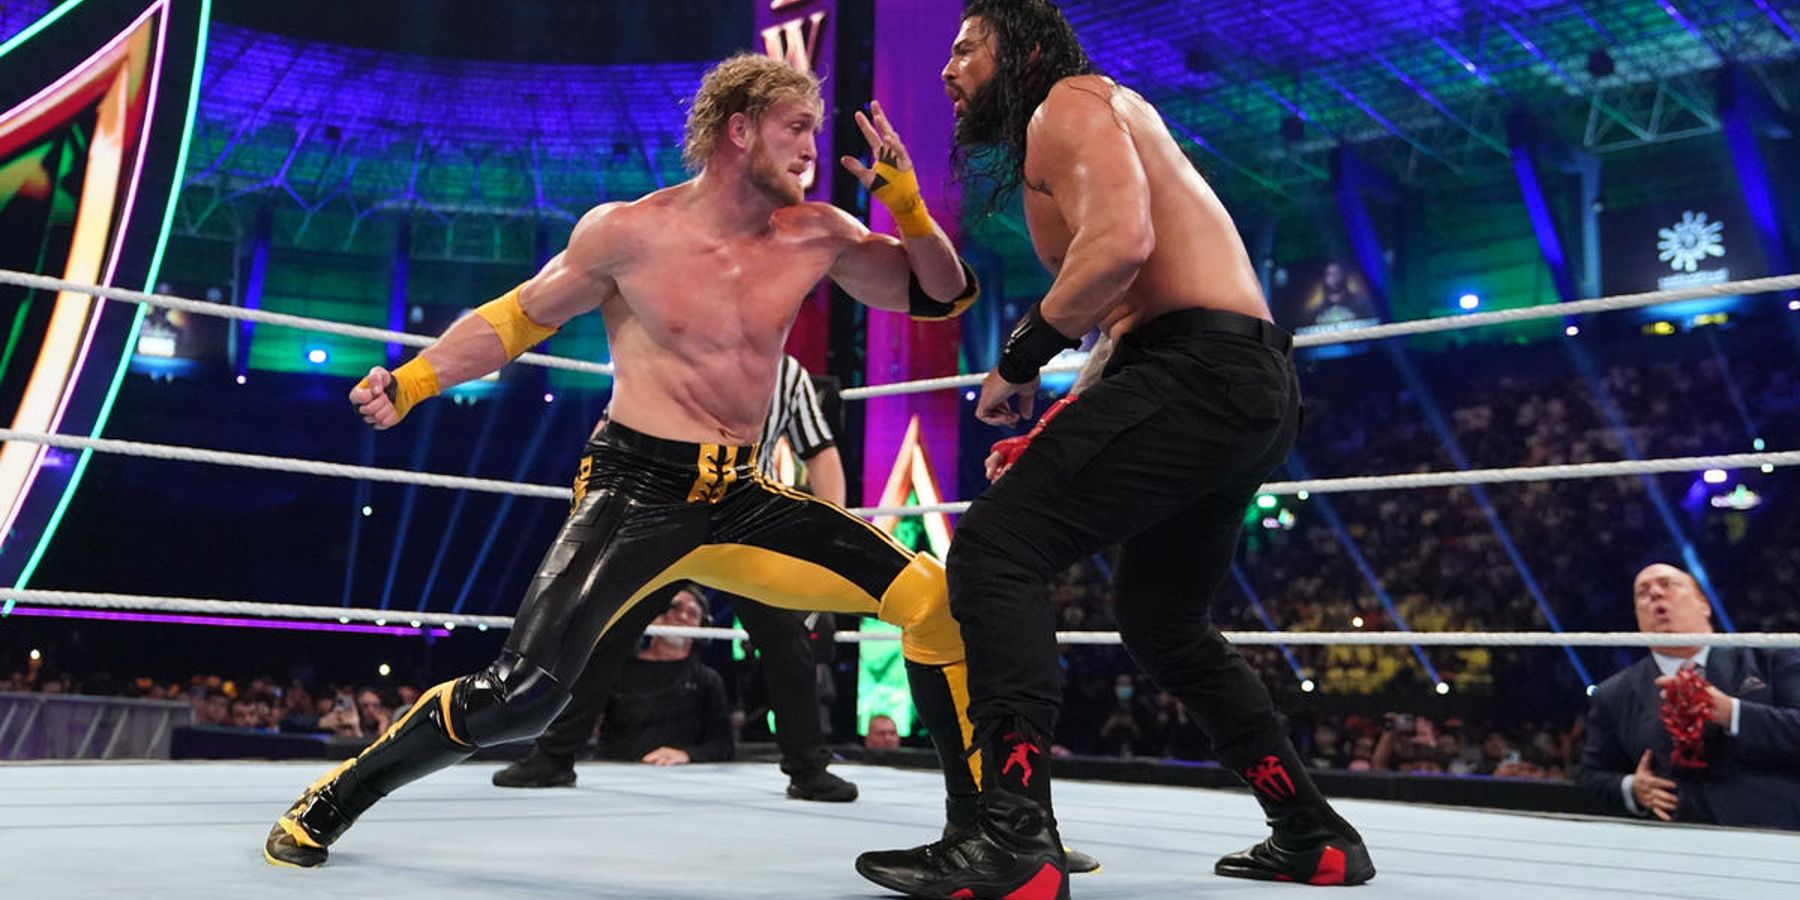 Logan Paul winds up to punch Roman Reigns during their match at WWE Crown Jewel.